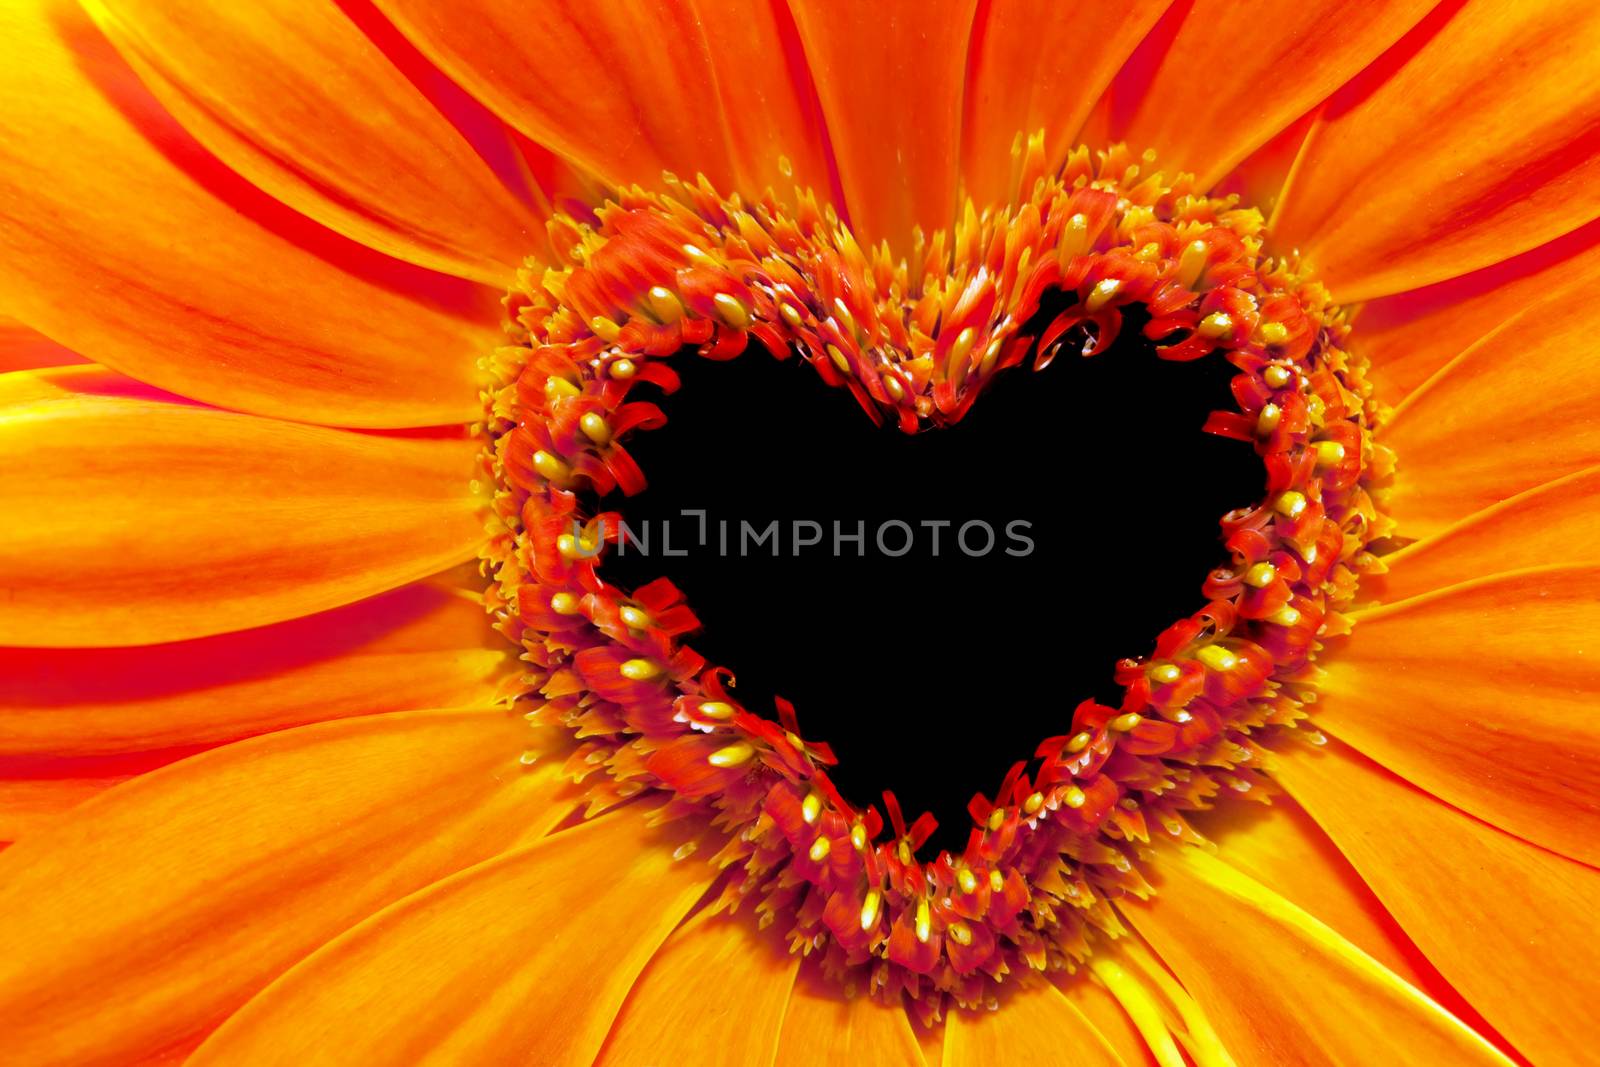 Flower close up with a heart shaped stamens section. Love, Valentine's Day concepts.